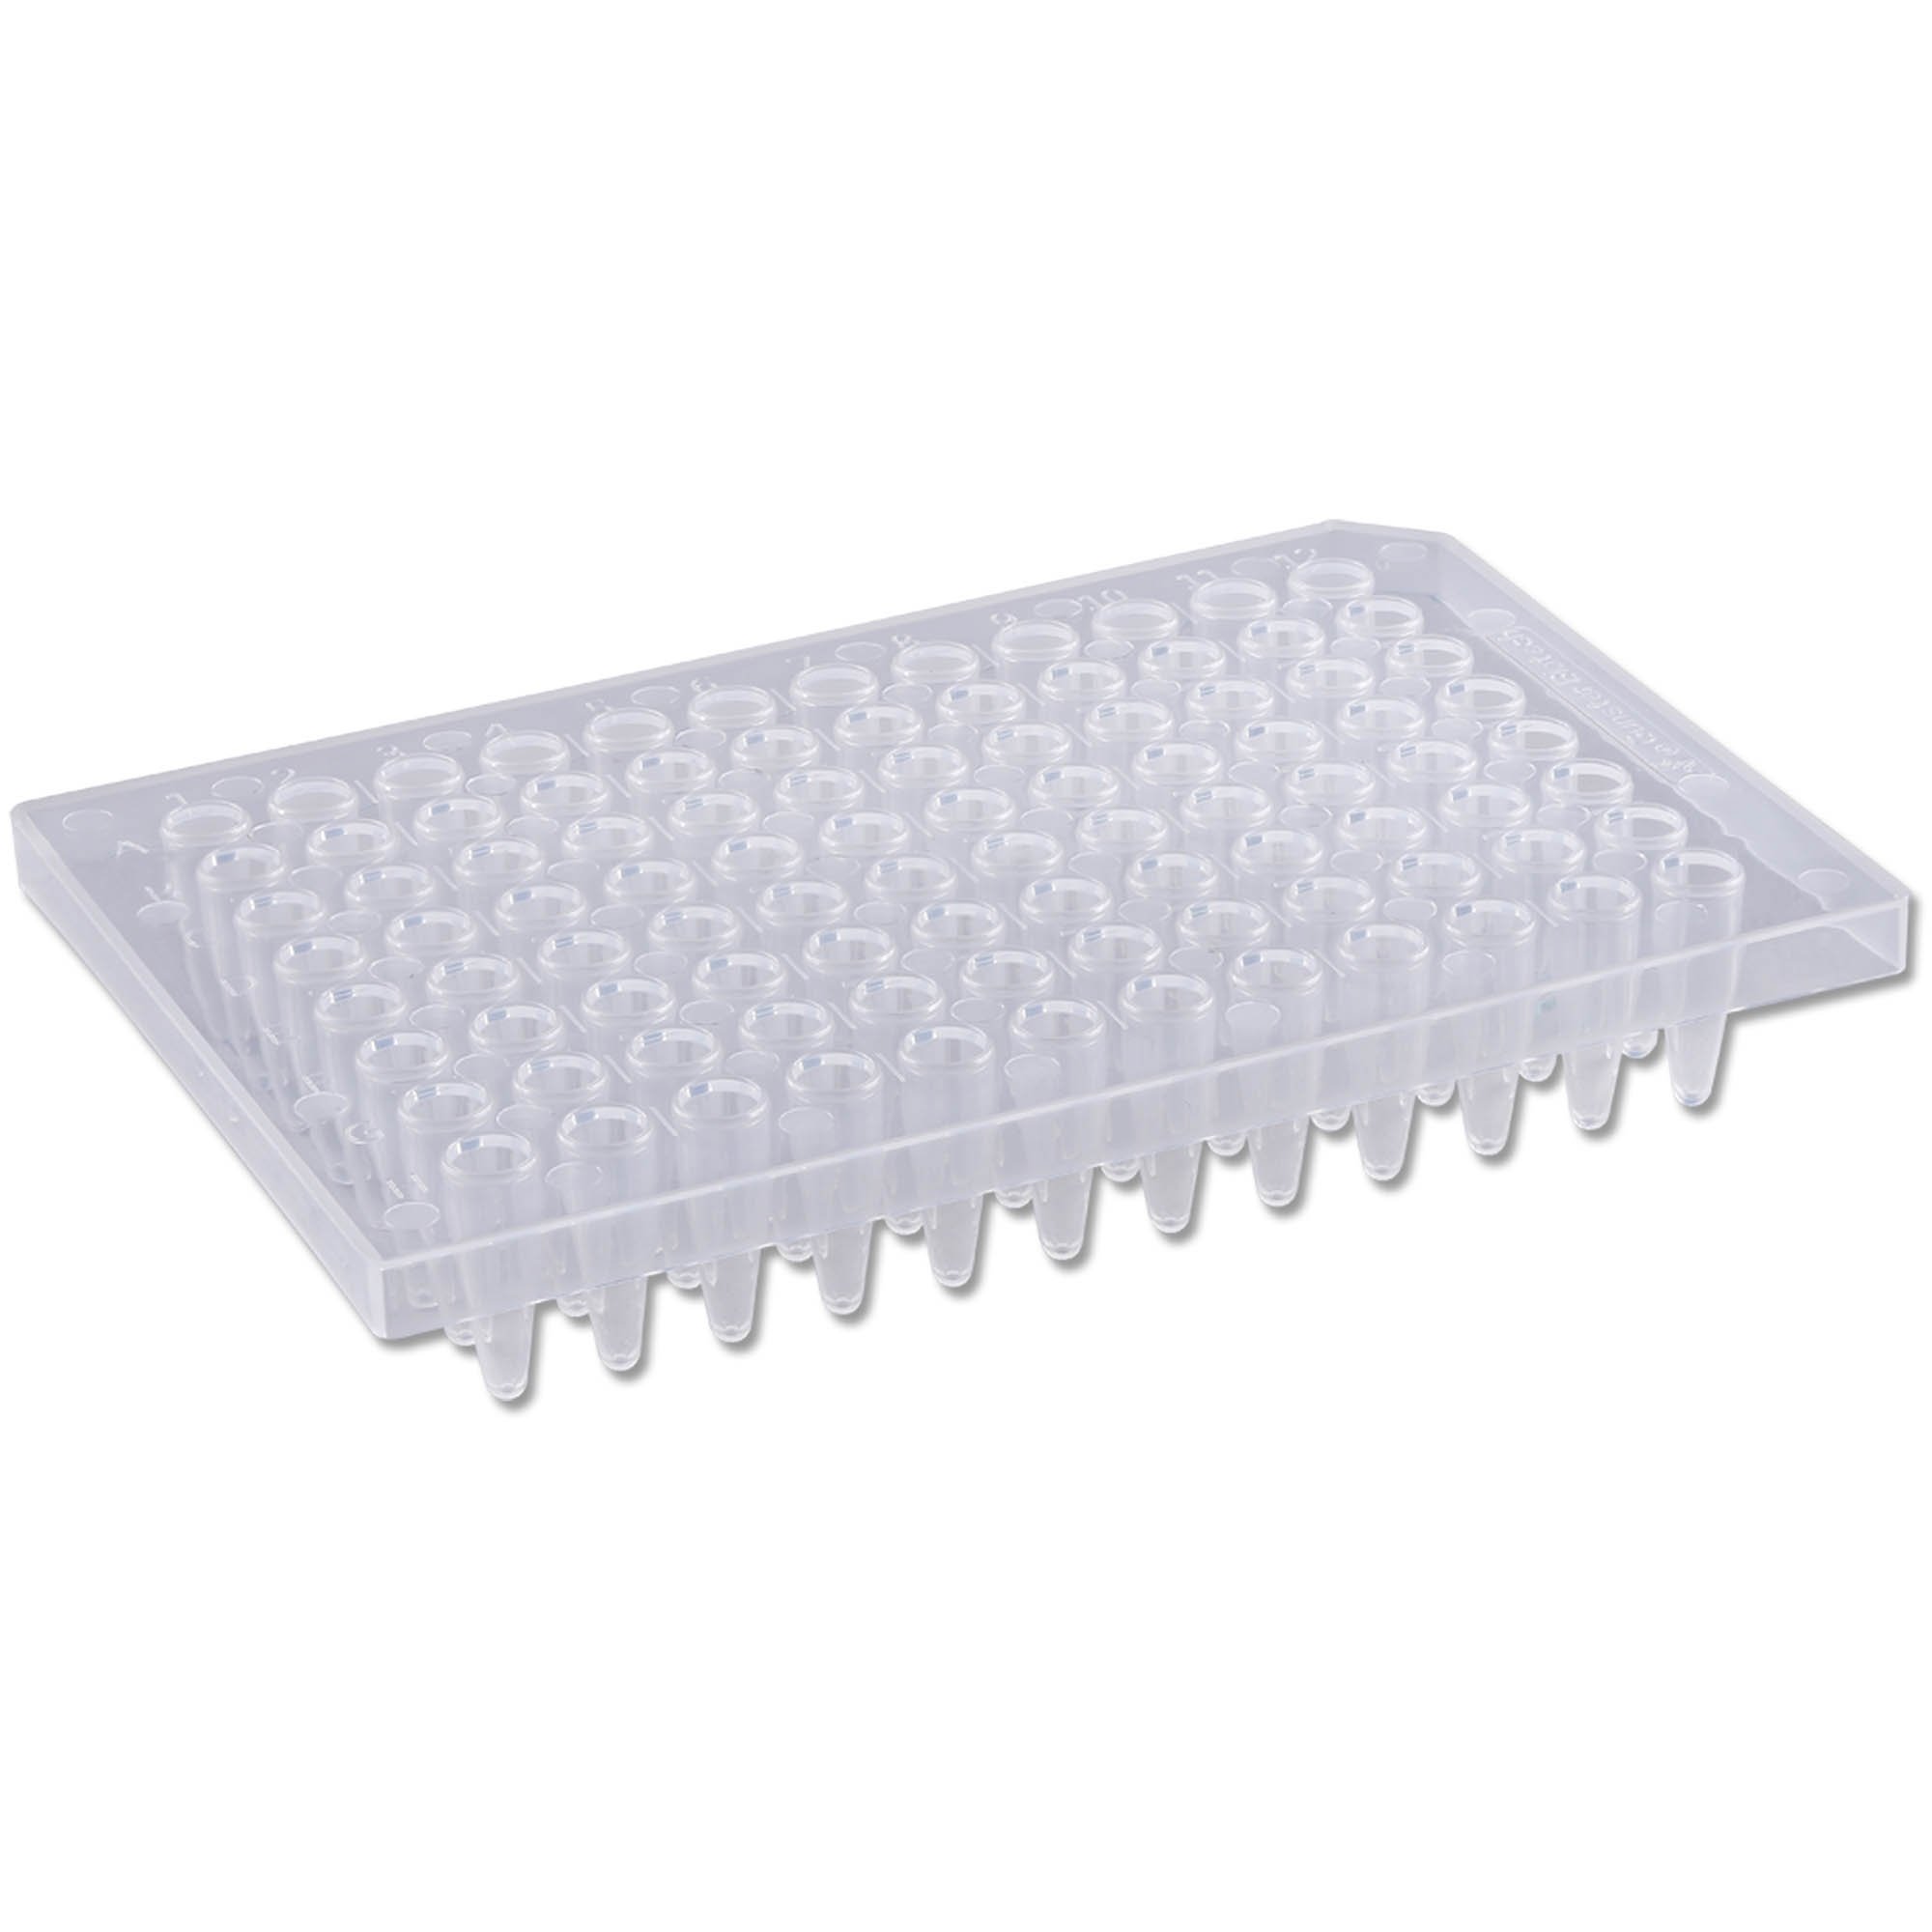 PureAmp 96-Well x 0.2mL PCR Plates - Semi Skirted, Natural (10 Packs of 50 per Pack)